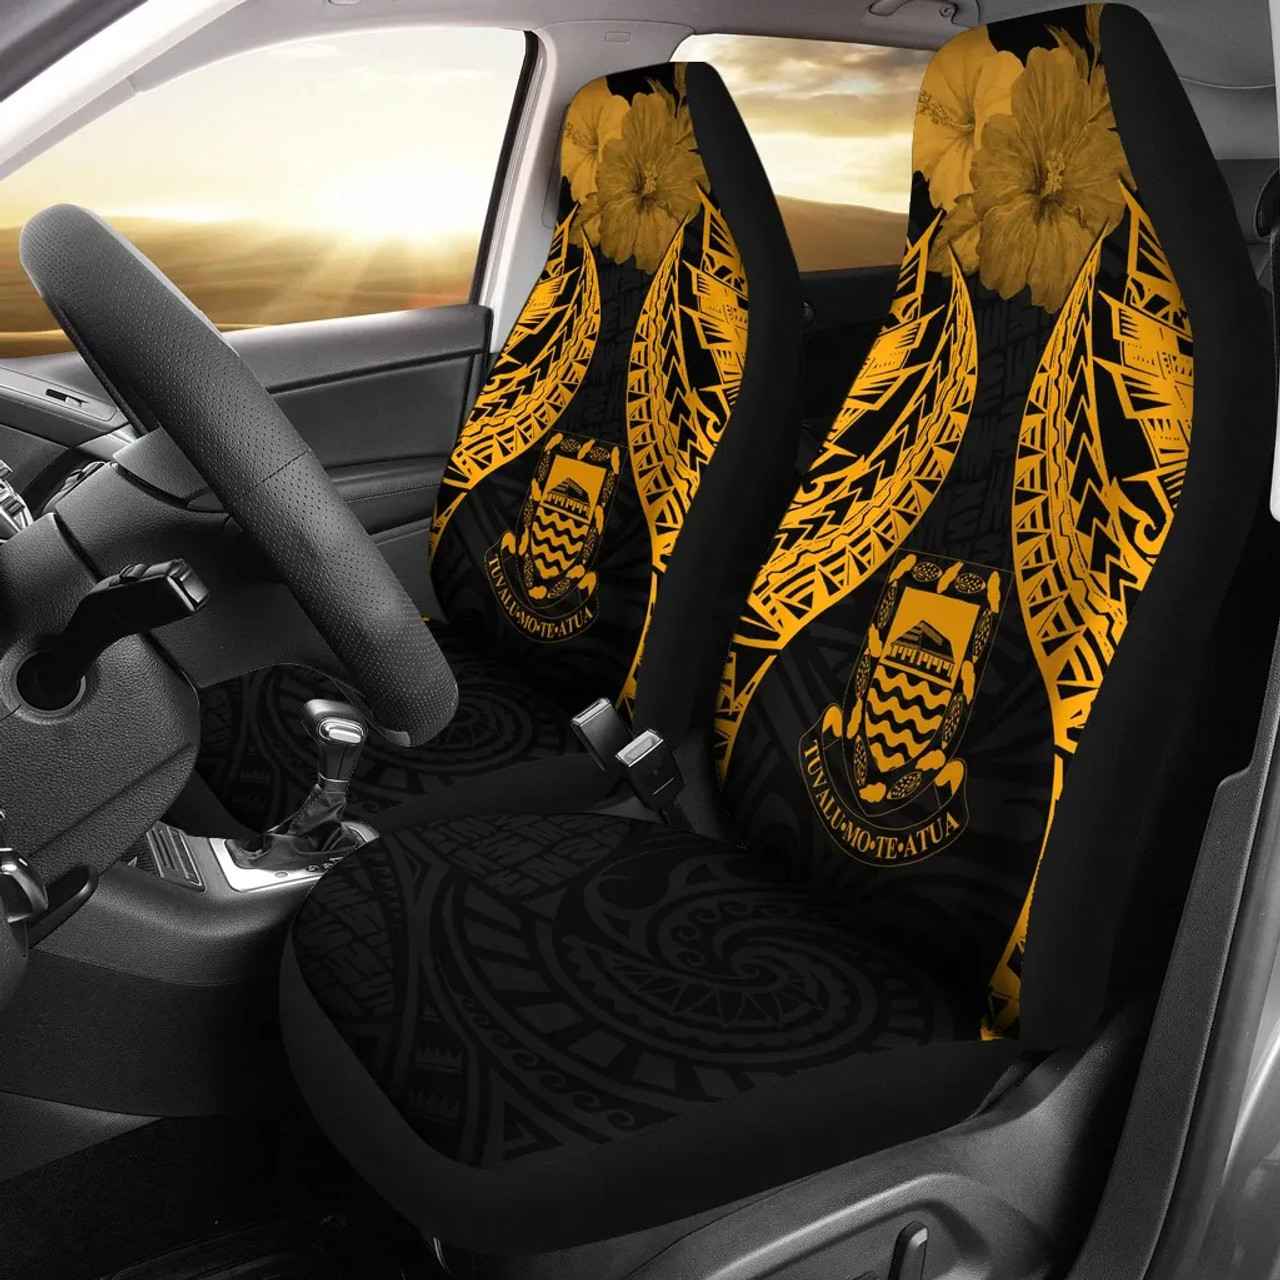 Tuvalu Polynesian Car Seat Covers Pride Seal And Hibiscus Gold